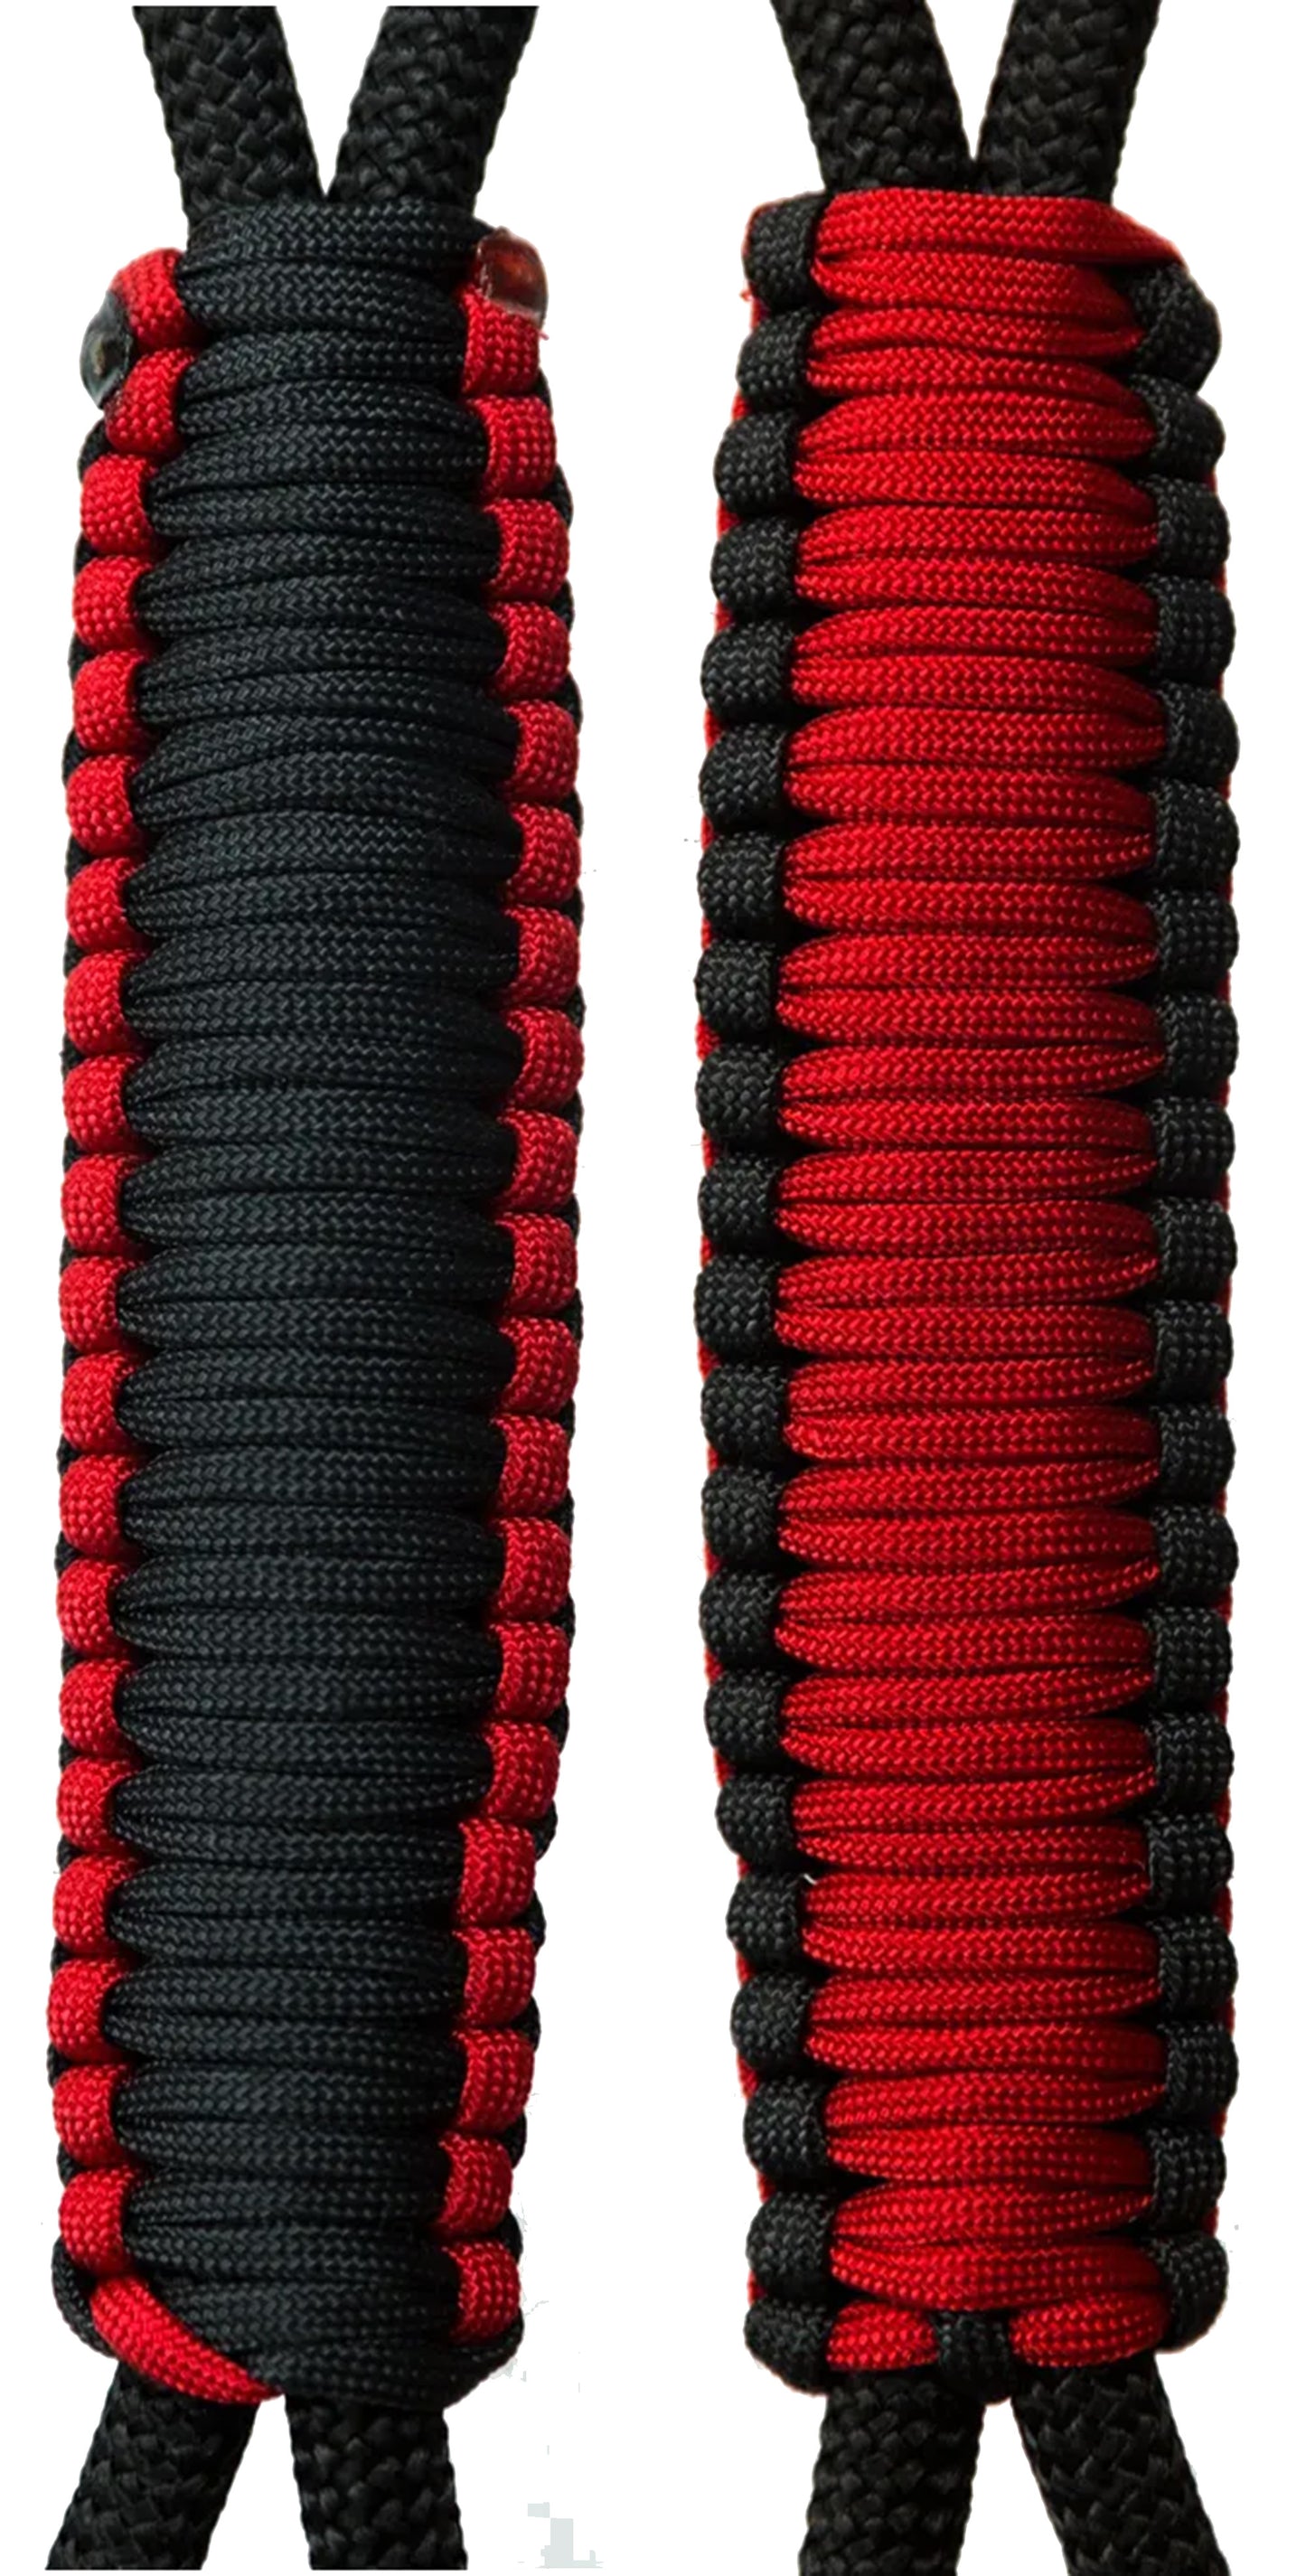 Red & Black C004C031 - Paracord Handmade Handles for Stainless Steel Tumblers - Made in USA!